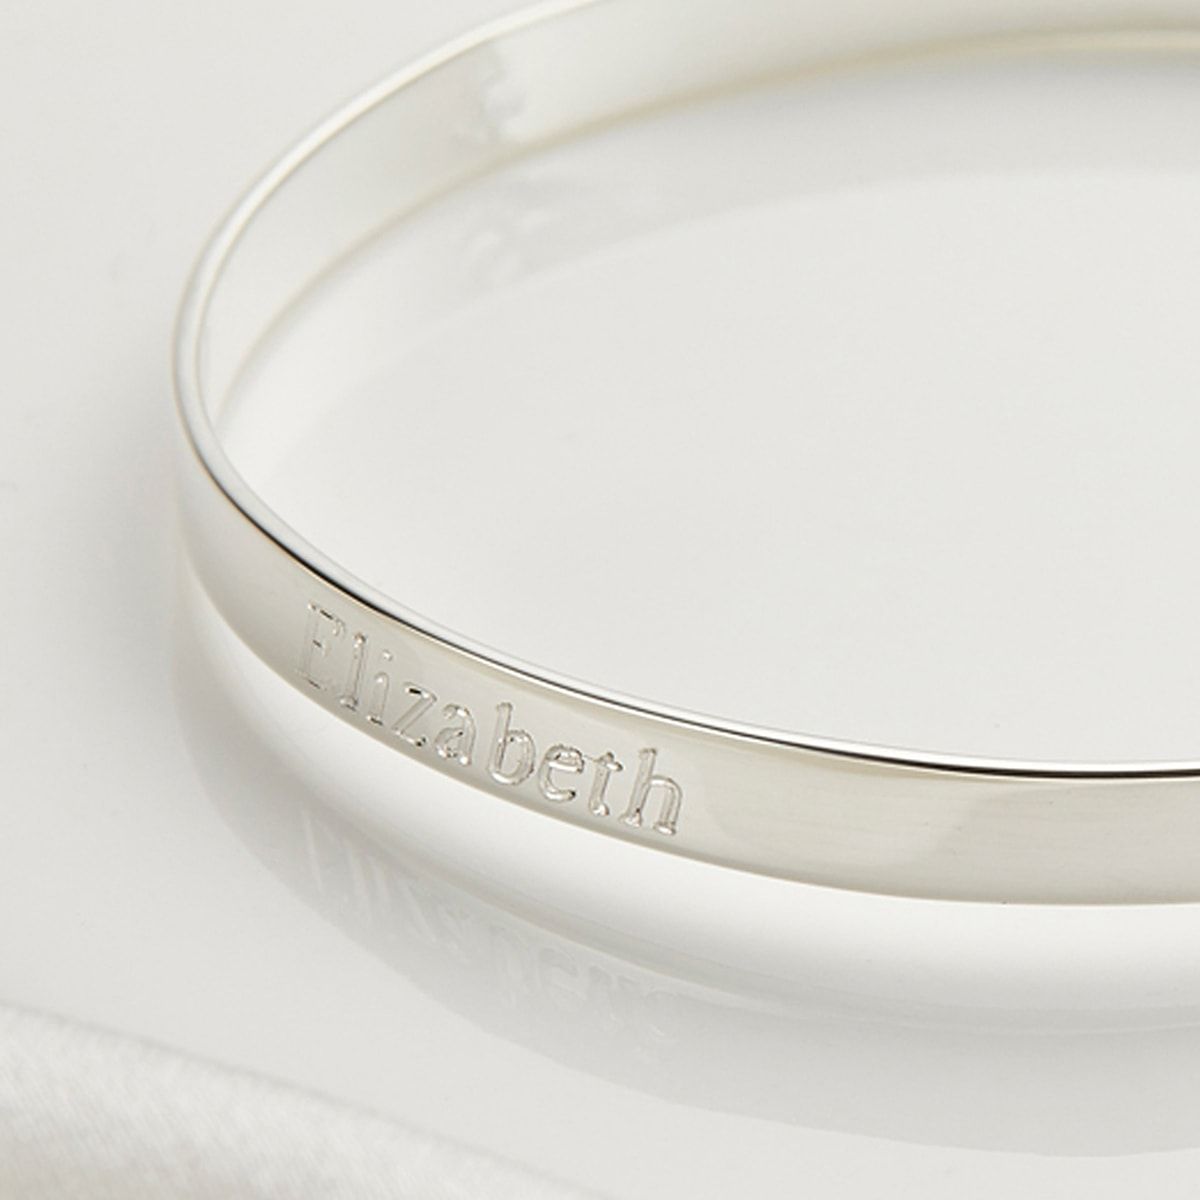 Silver Personalized Baptism Baby Bangle — My First Pearl 